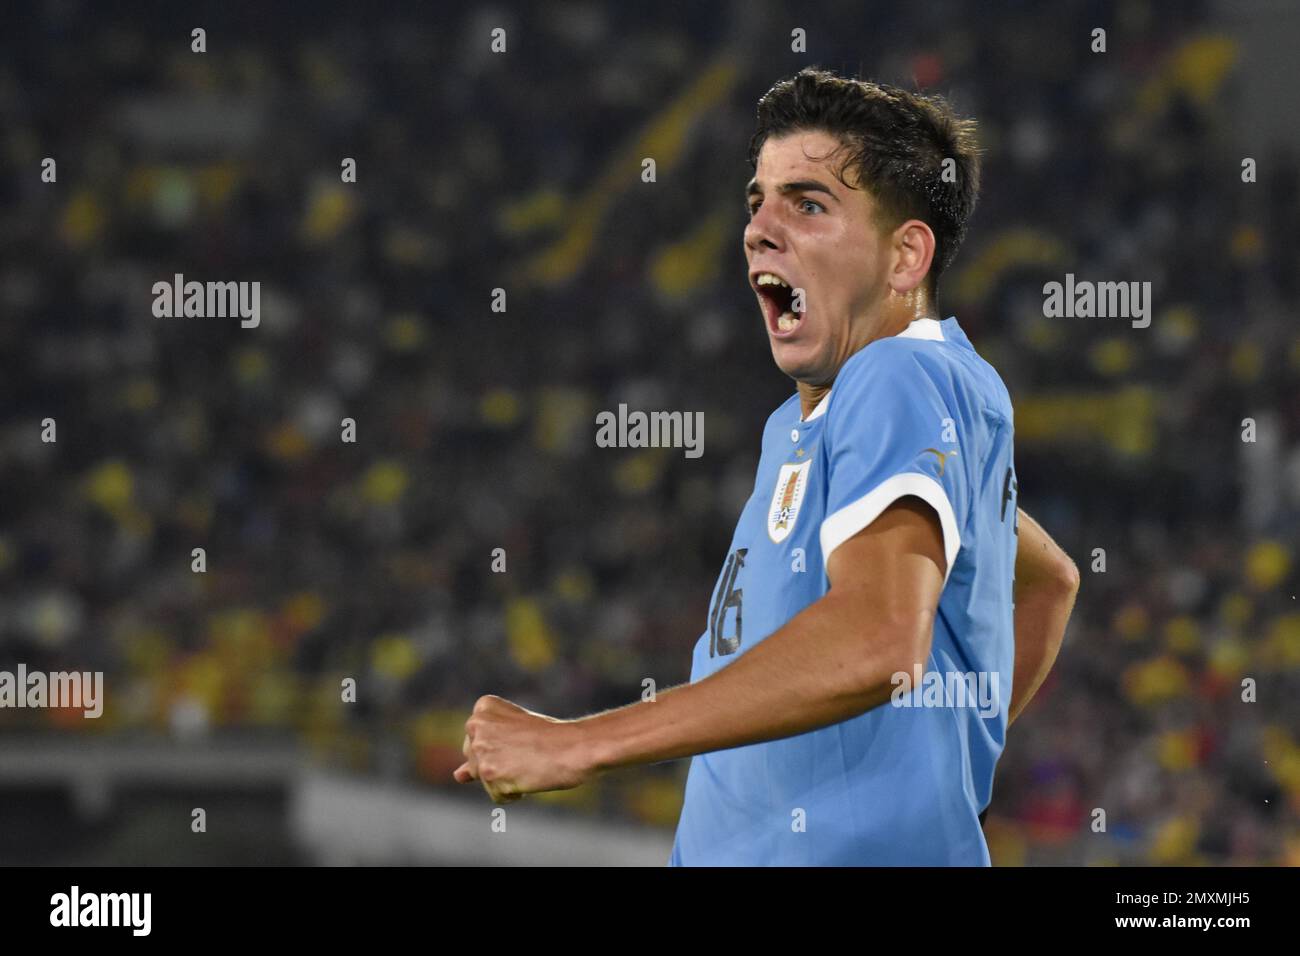 Uruguay's Facu Gonzalez celebrates scoring a goal during the CONMEBOL South American Tournament match between Colombia Vs Uruguay, in Bogota, Colombia on January 31, 2023. Photo by: Cristian Bayona/Long Visual Press Stock Photo